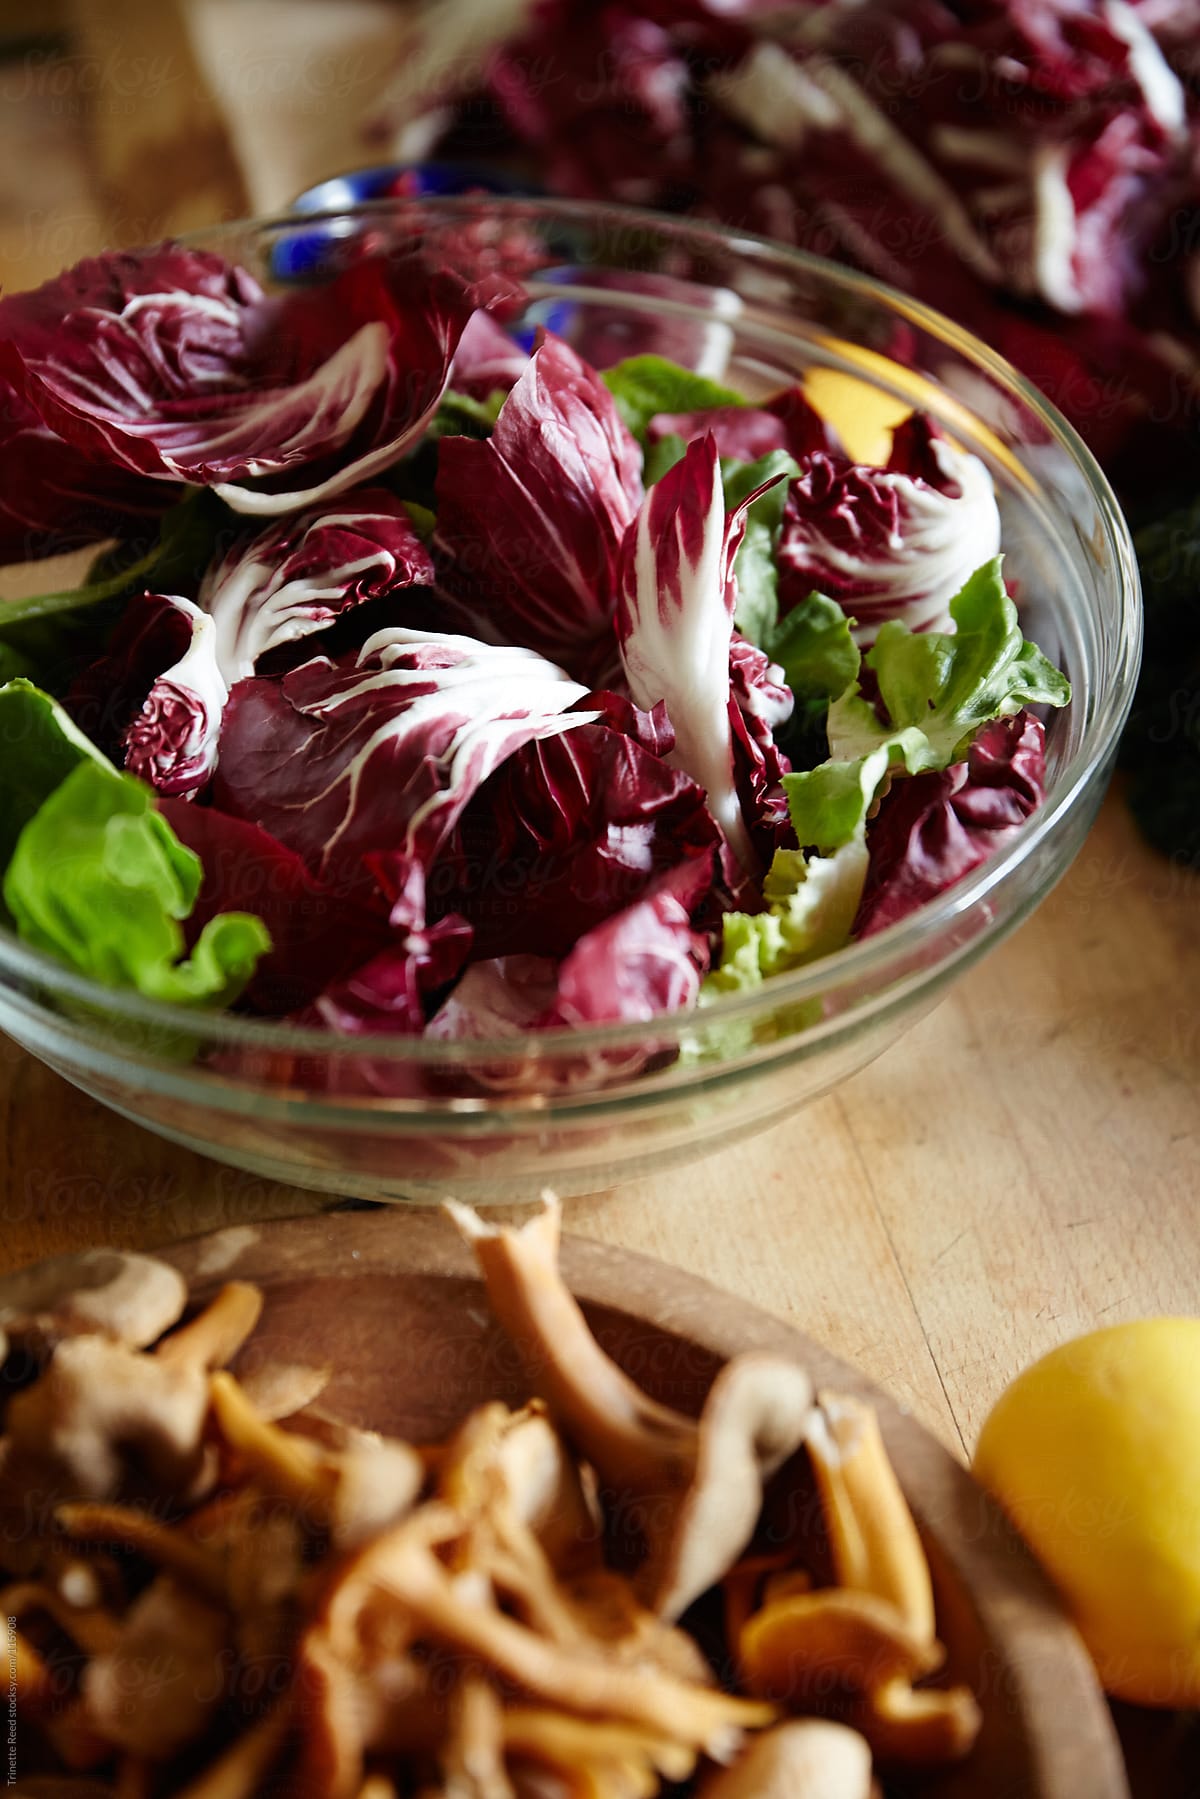 Butter lettuce and radicchio salad, wild mushrooms on kitchen counter